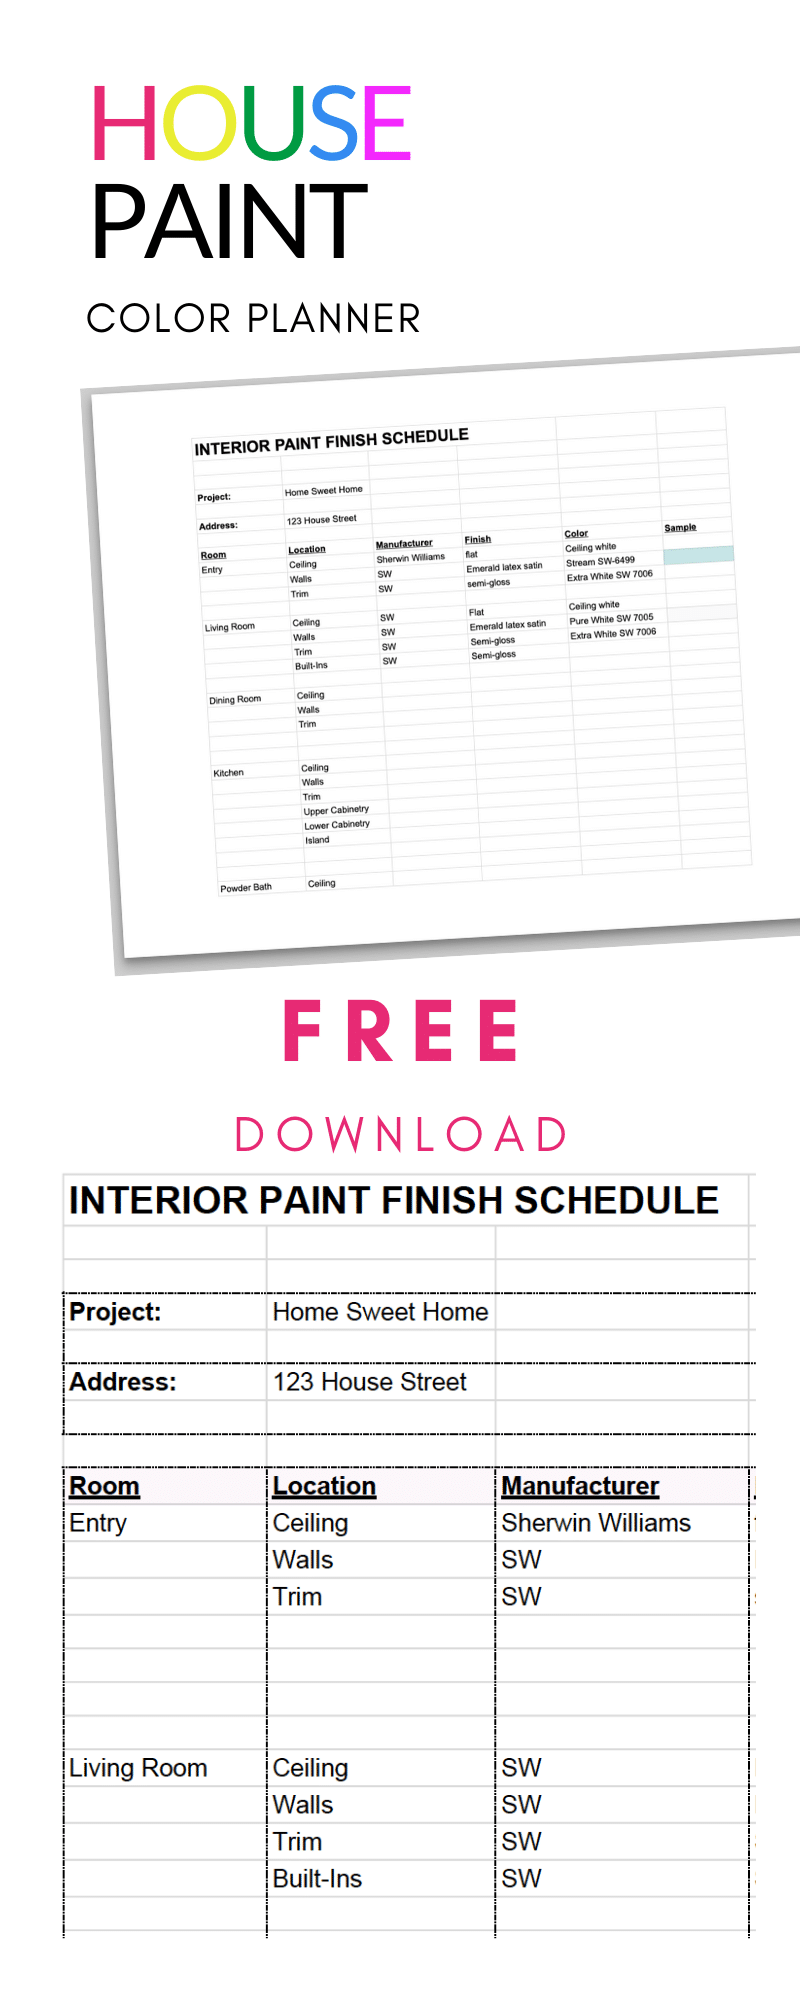 FREE HOUSE PAINT COLOR TRACKER PRINTABLE